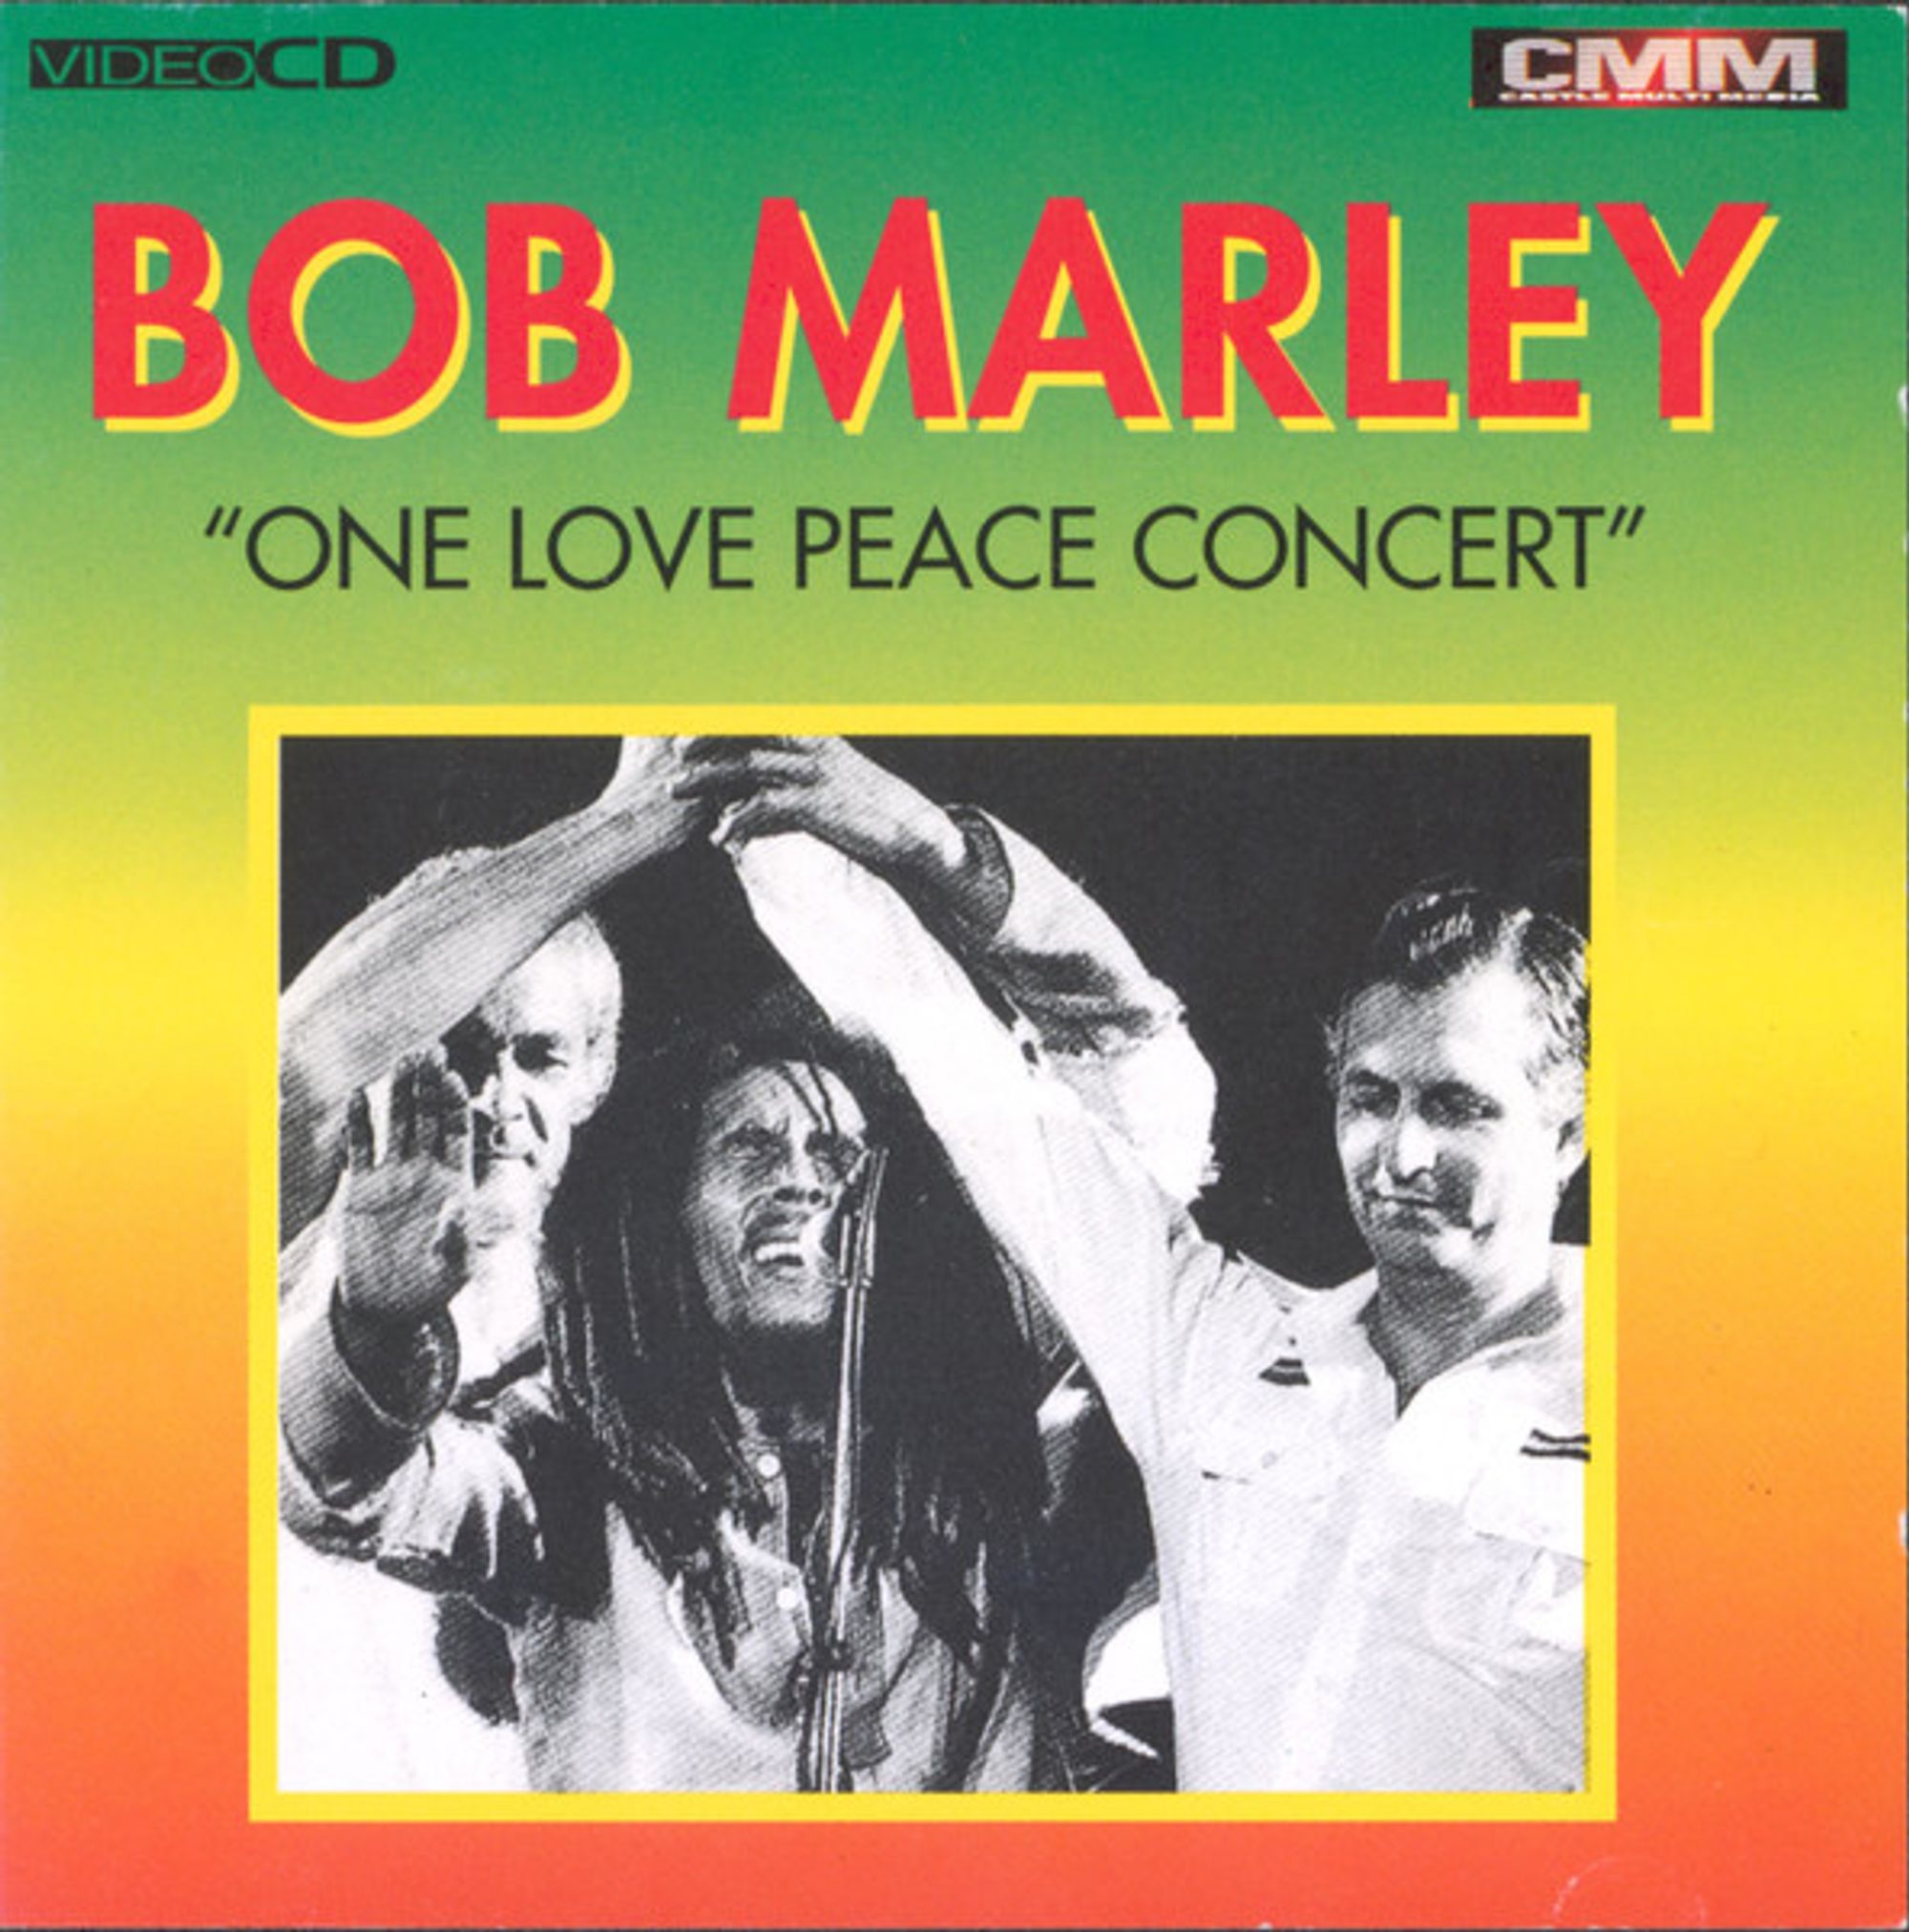 A black and white image of Bob Marley on stage, framed in a colorful frame of green, yellow, and orange with the text "Bob Marley: One Love Peace Concert" written across it.